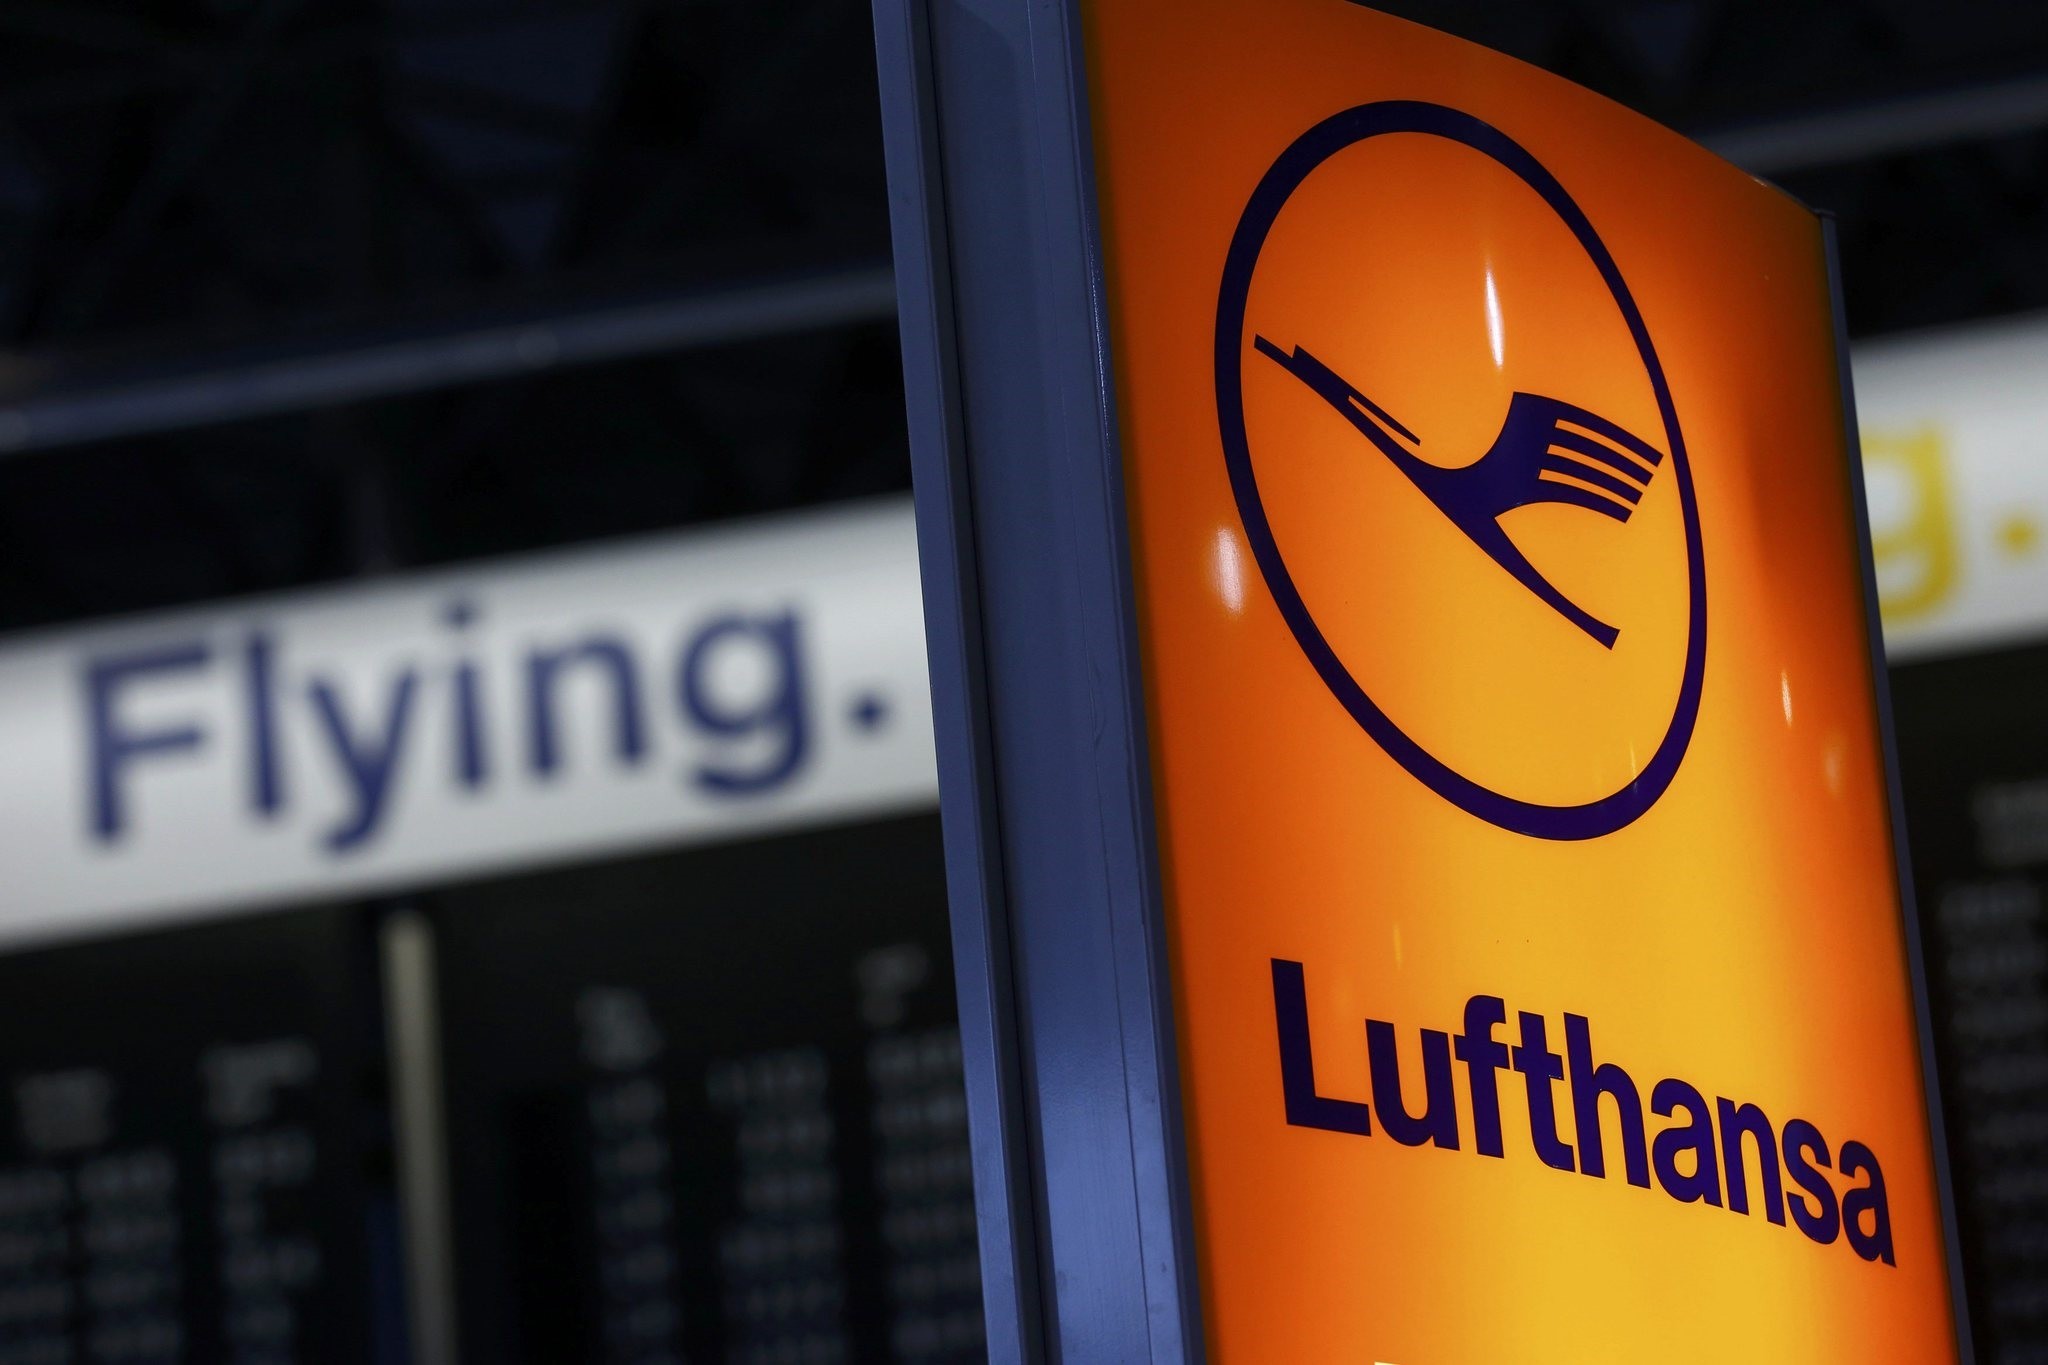 A Lufthansa airline logo is pictured in Frankfurt airport, Germany, November 6, 2015. (REUTERS Photo)